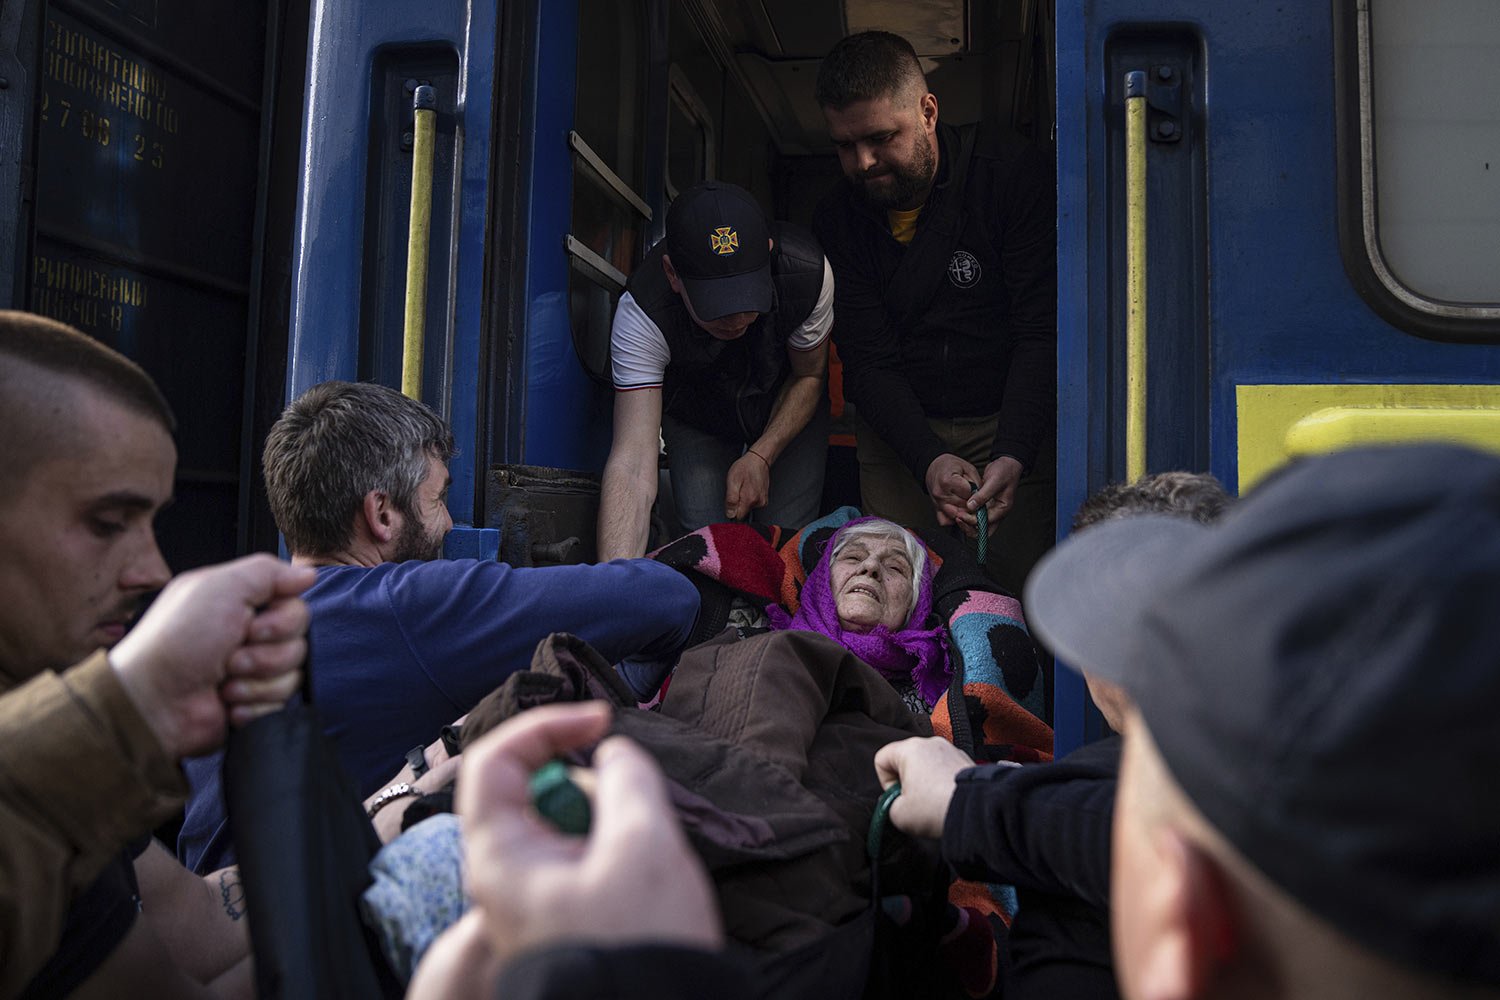  Rescue workers help a disabled, elderly woman enter an evacuation train in Pokrovsk in eastern Ukraine, Tuesday, April 26, 2022. (AP Photo/Evgeniy Maloletka) 